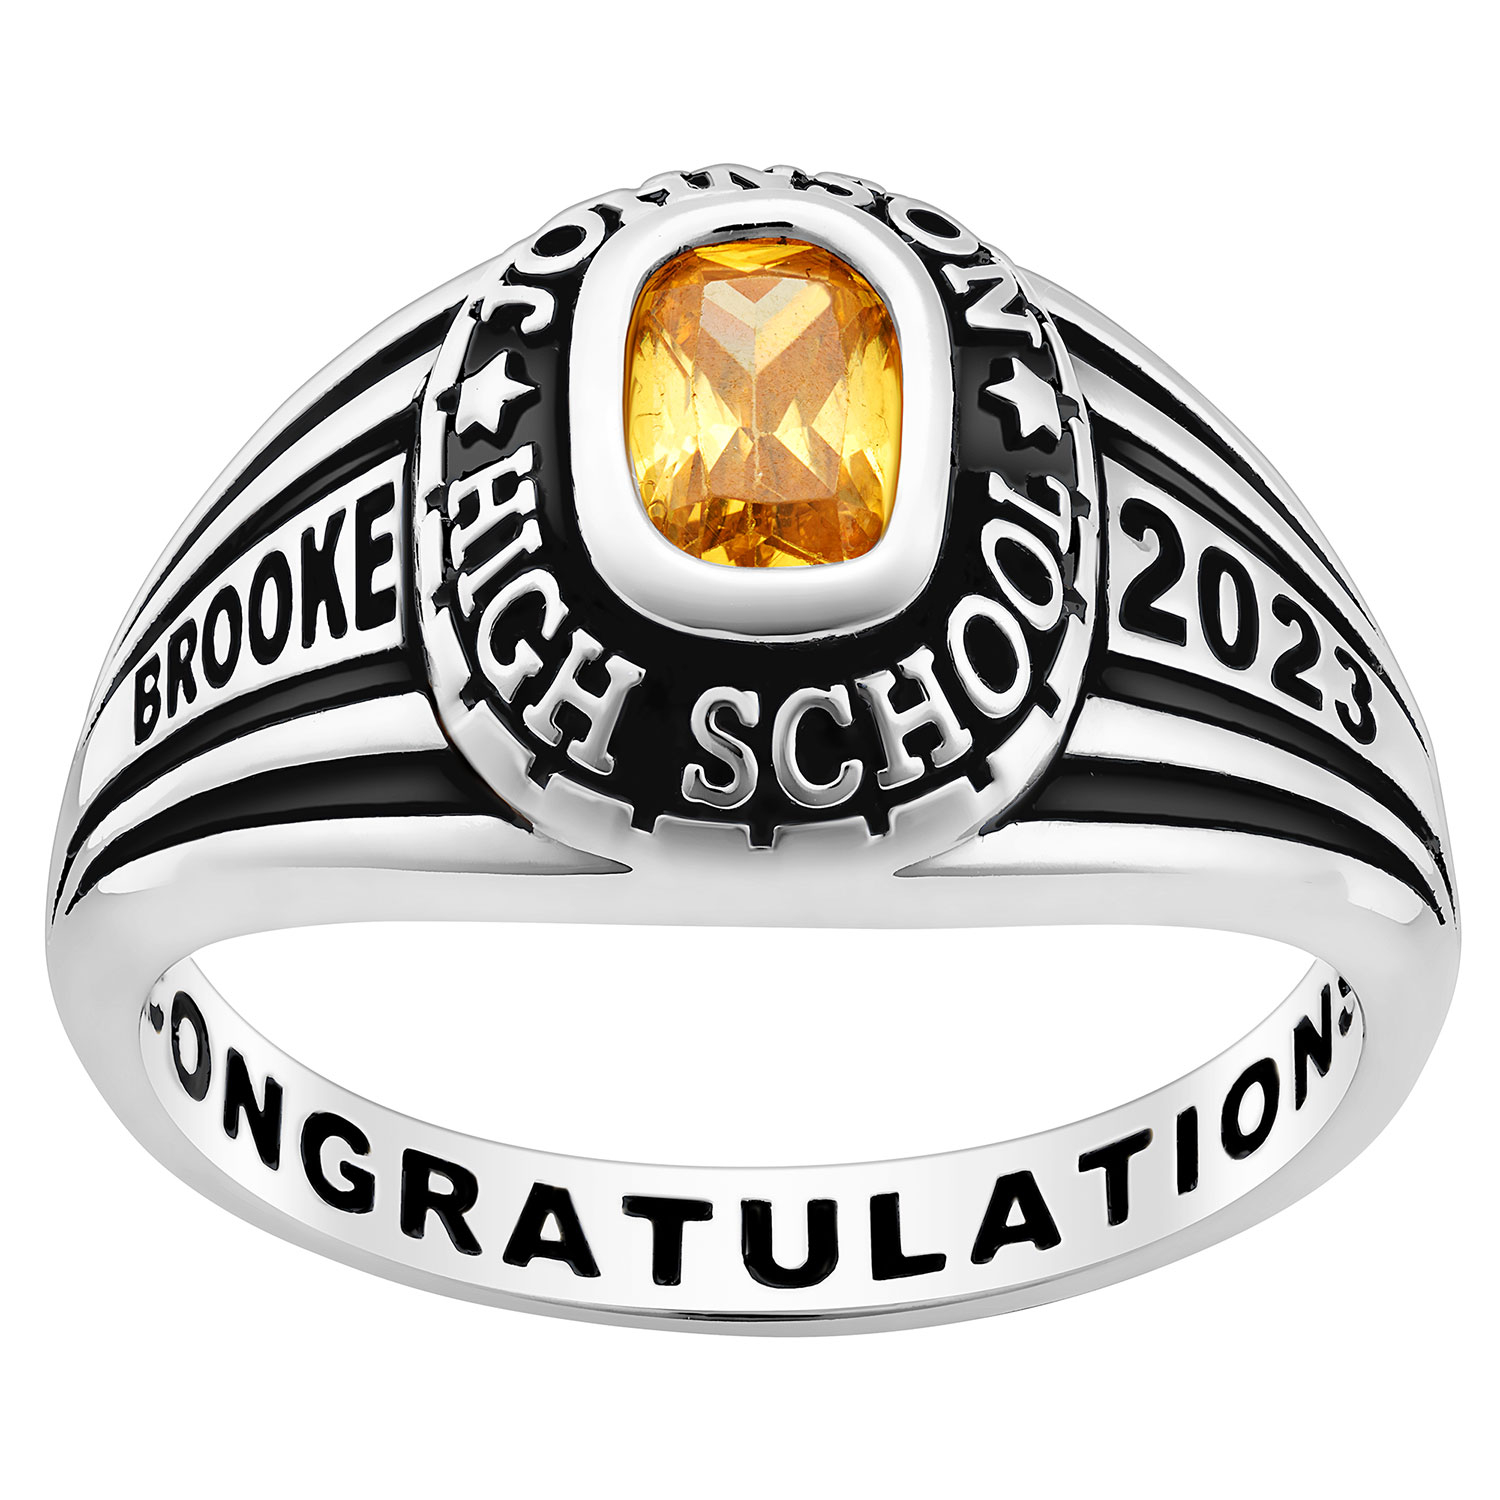 Ladies' Platinum over Sterling Traditional Class Ring